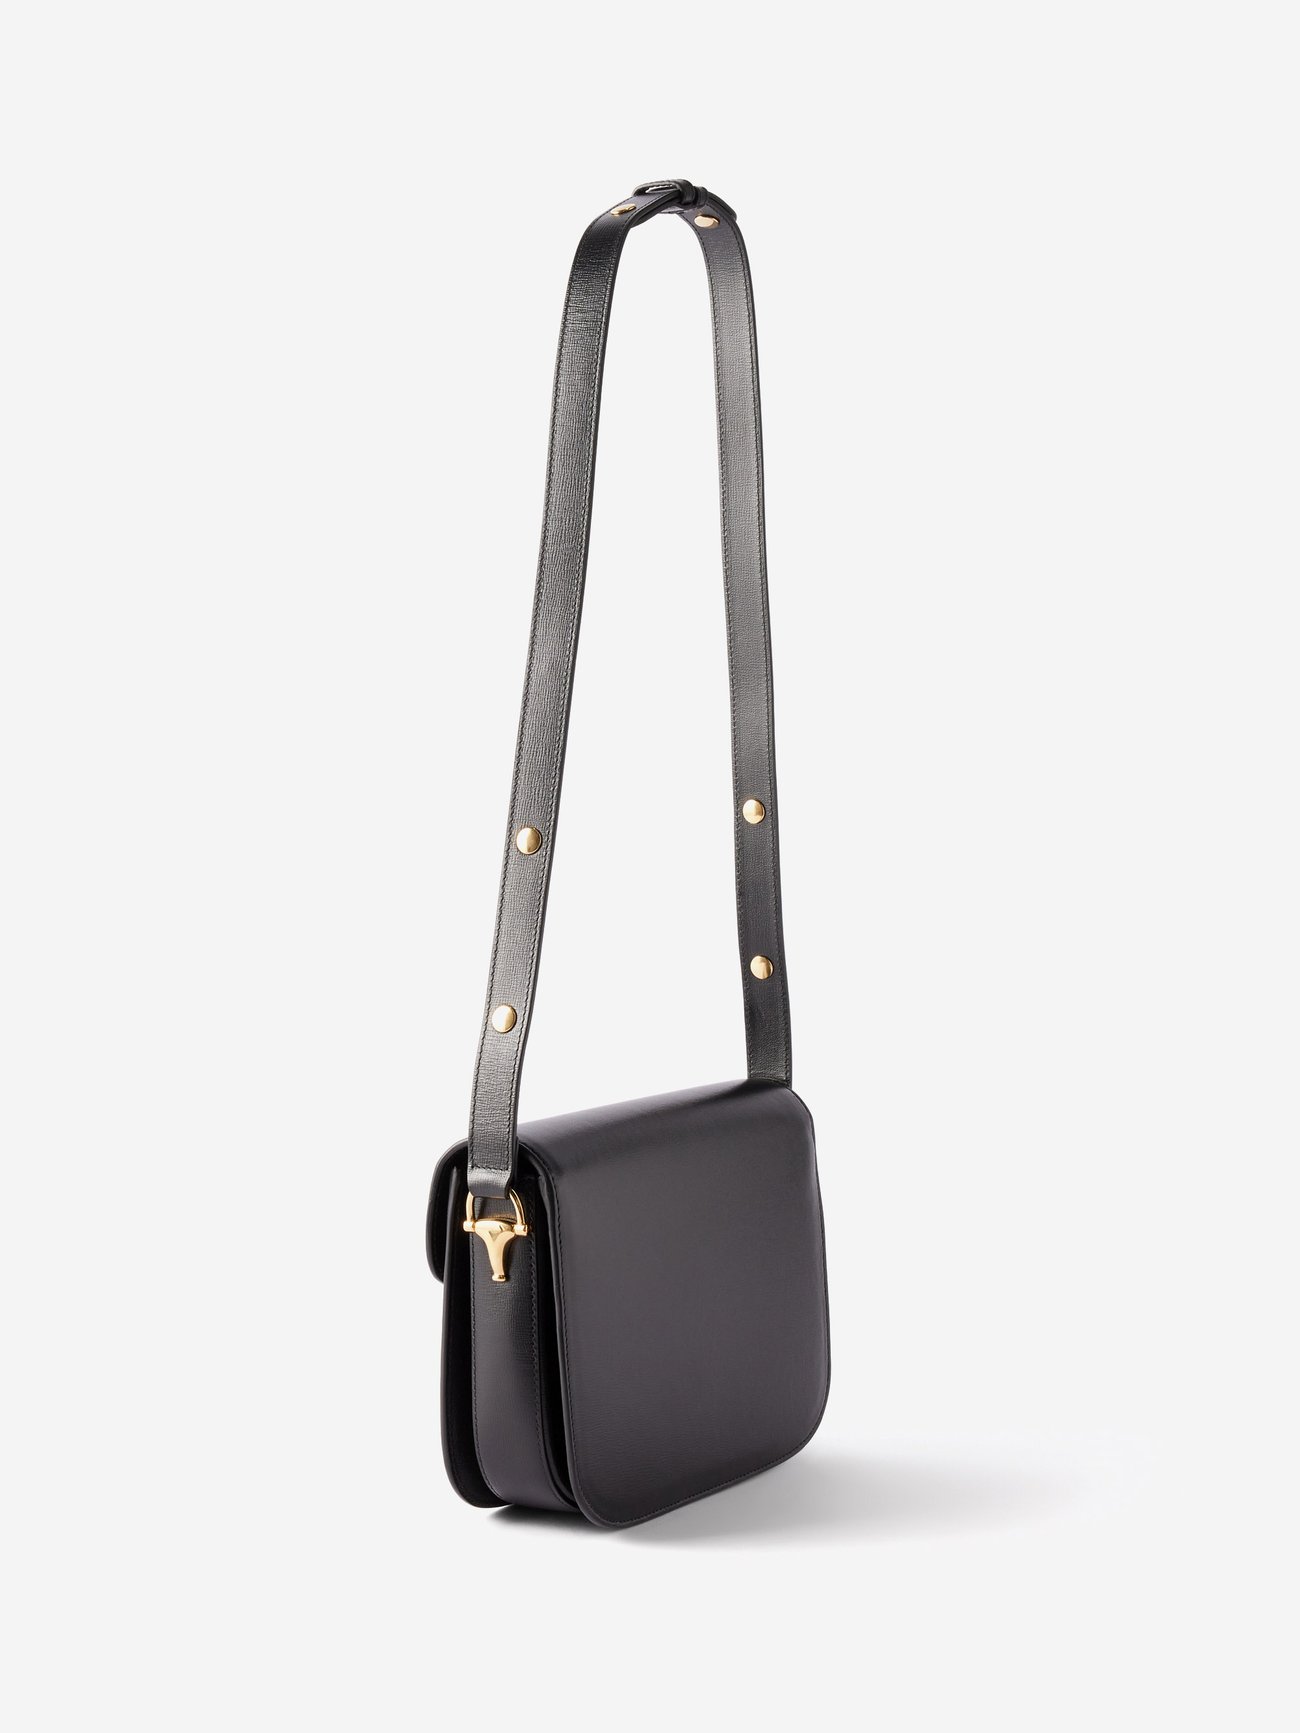 Gucci Horsebit 1955 Shoulder Bag Mini Black in Leather with Gold-tone - US